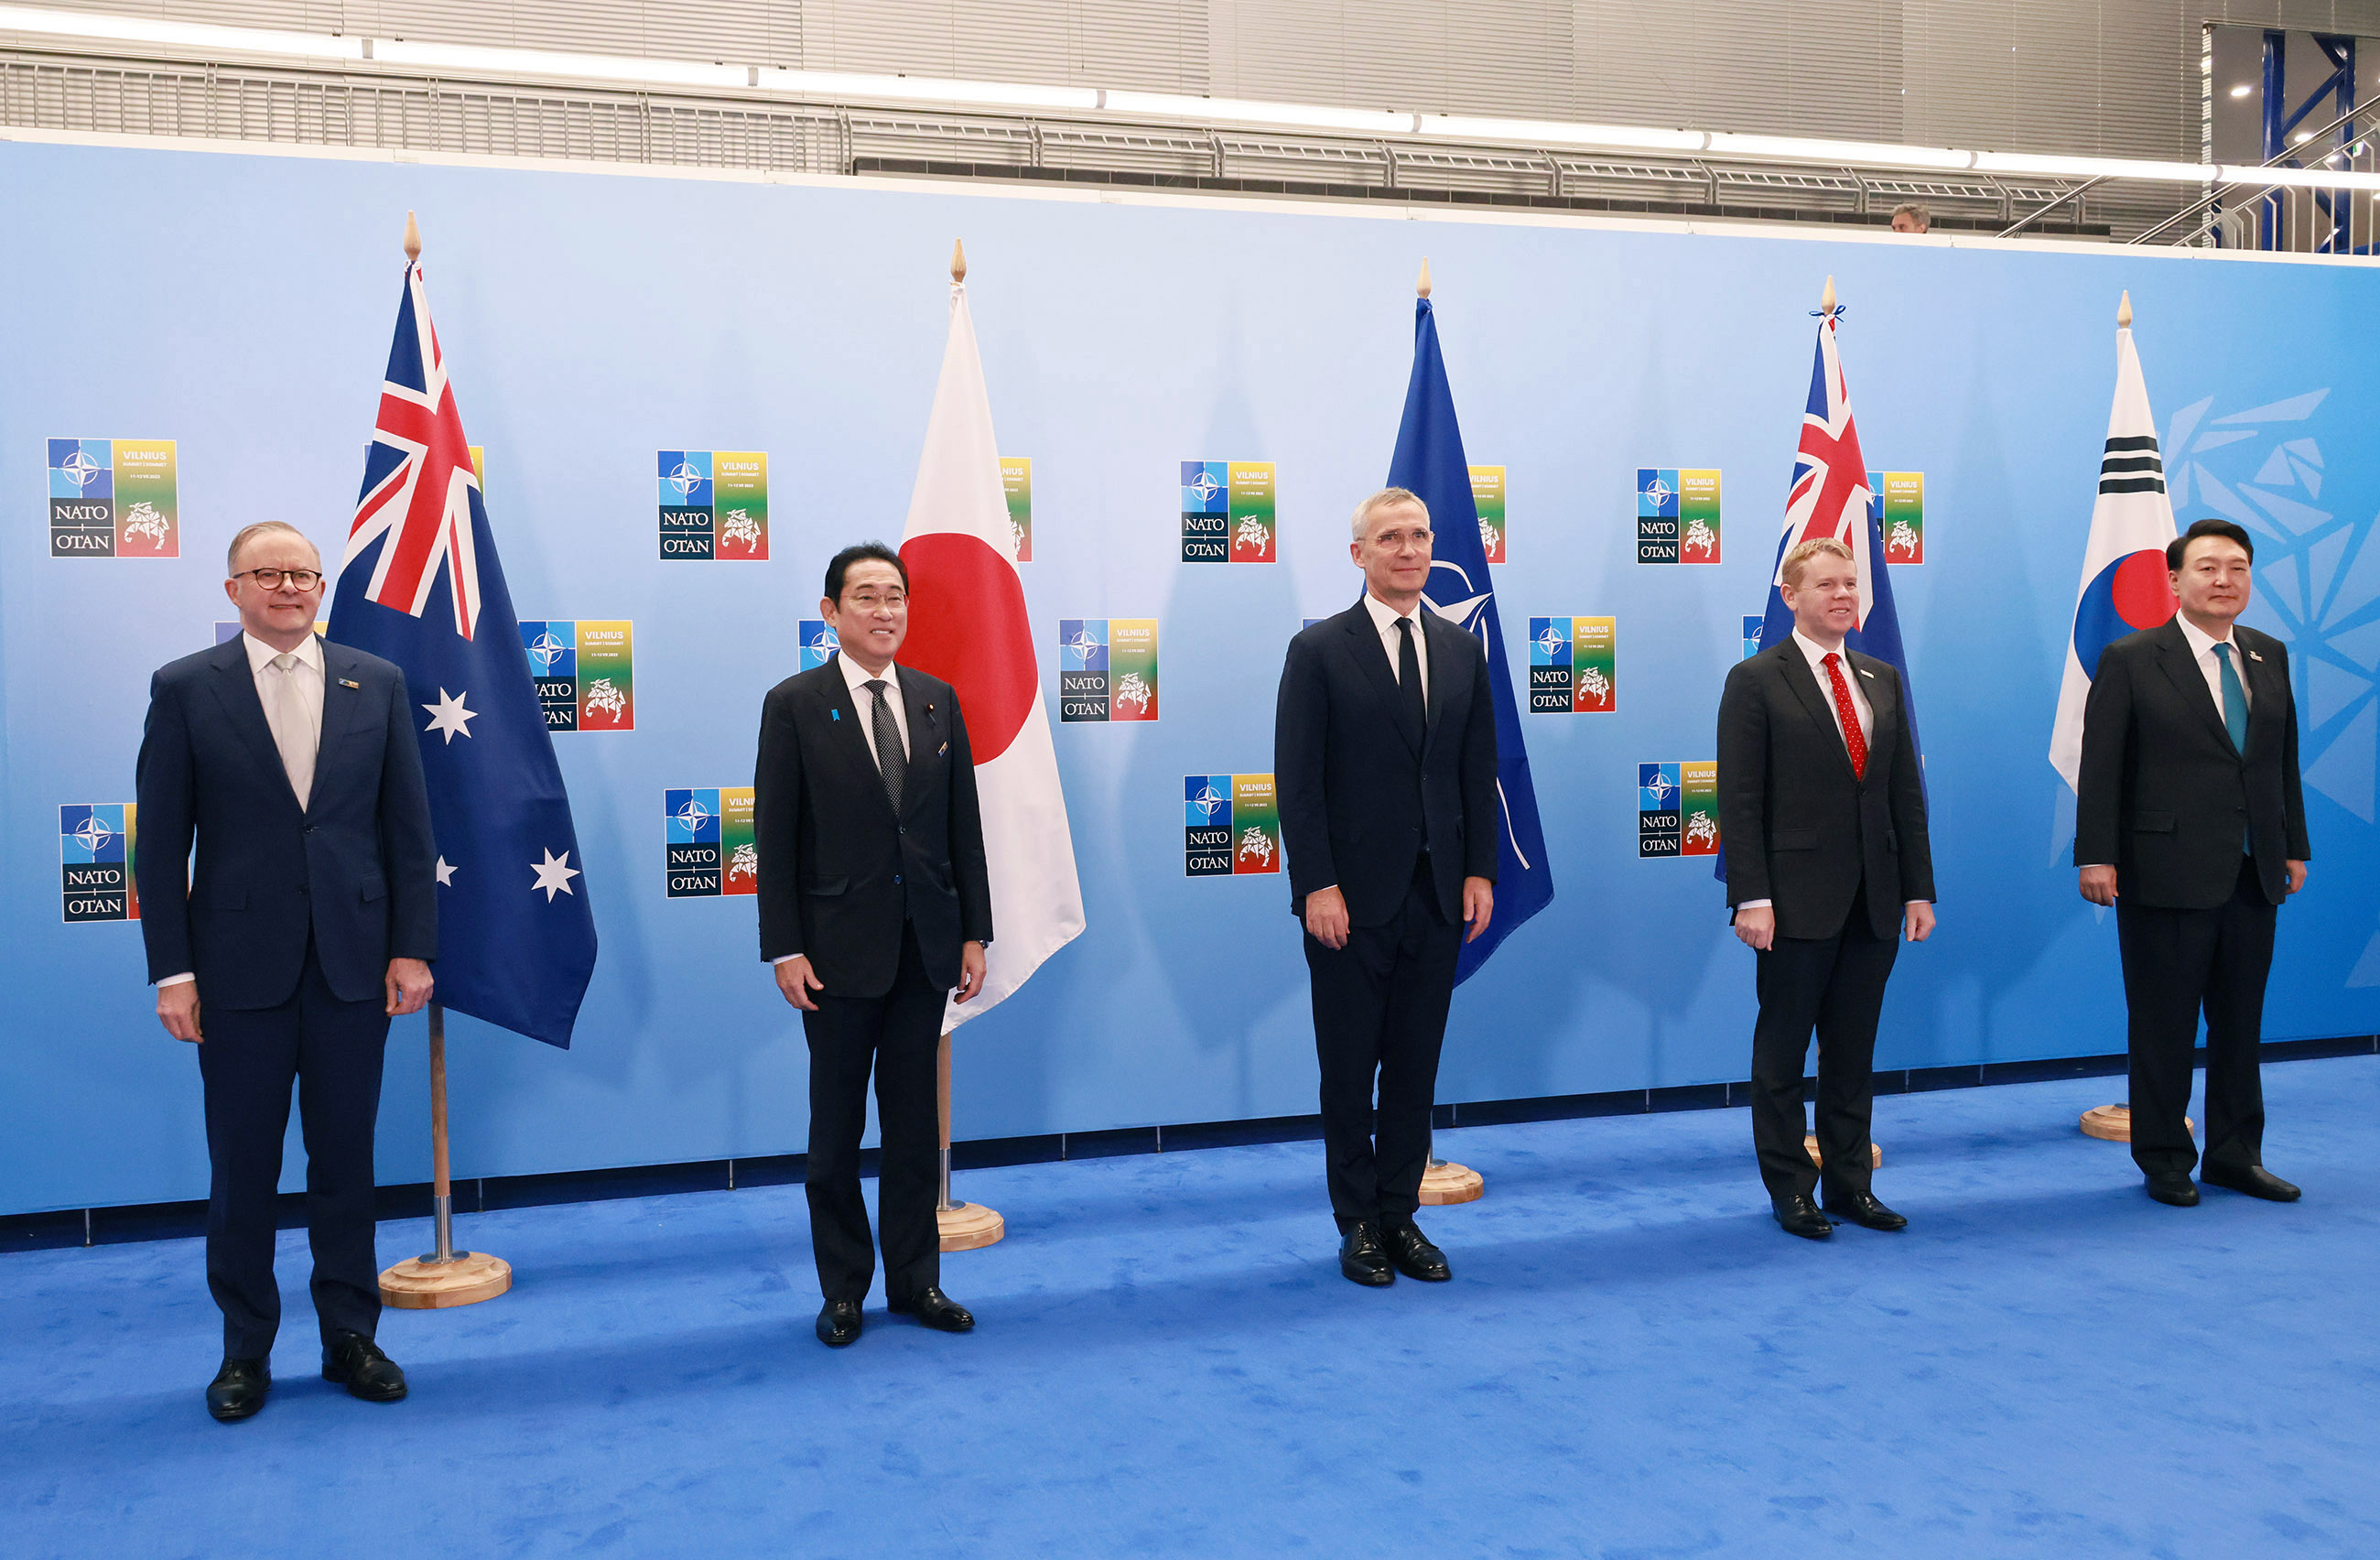 Photo session with the leaders of the AP4 countries and the NATO Secretary General